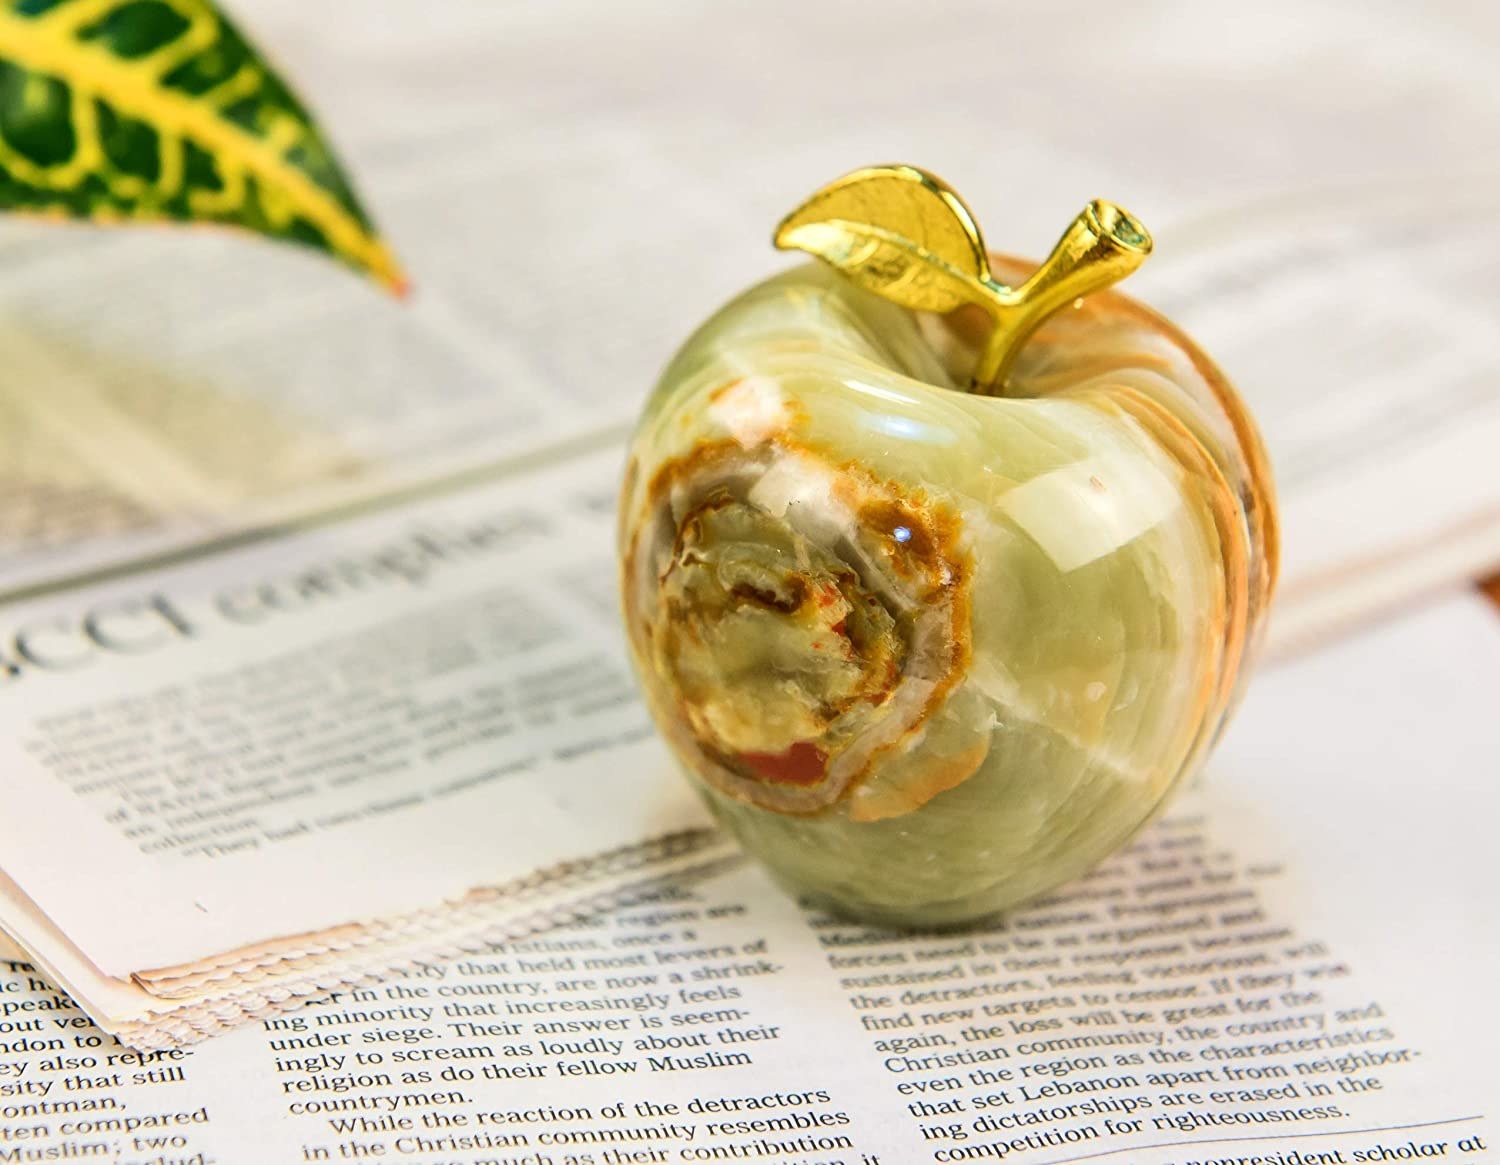 The apple-shaped paperweight placed on top of a pile of newspaper